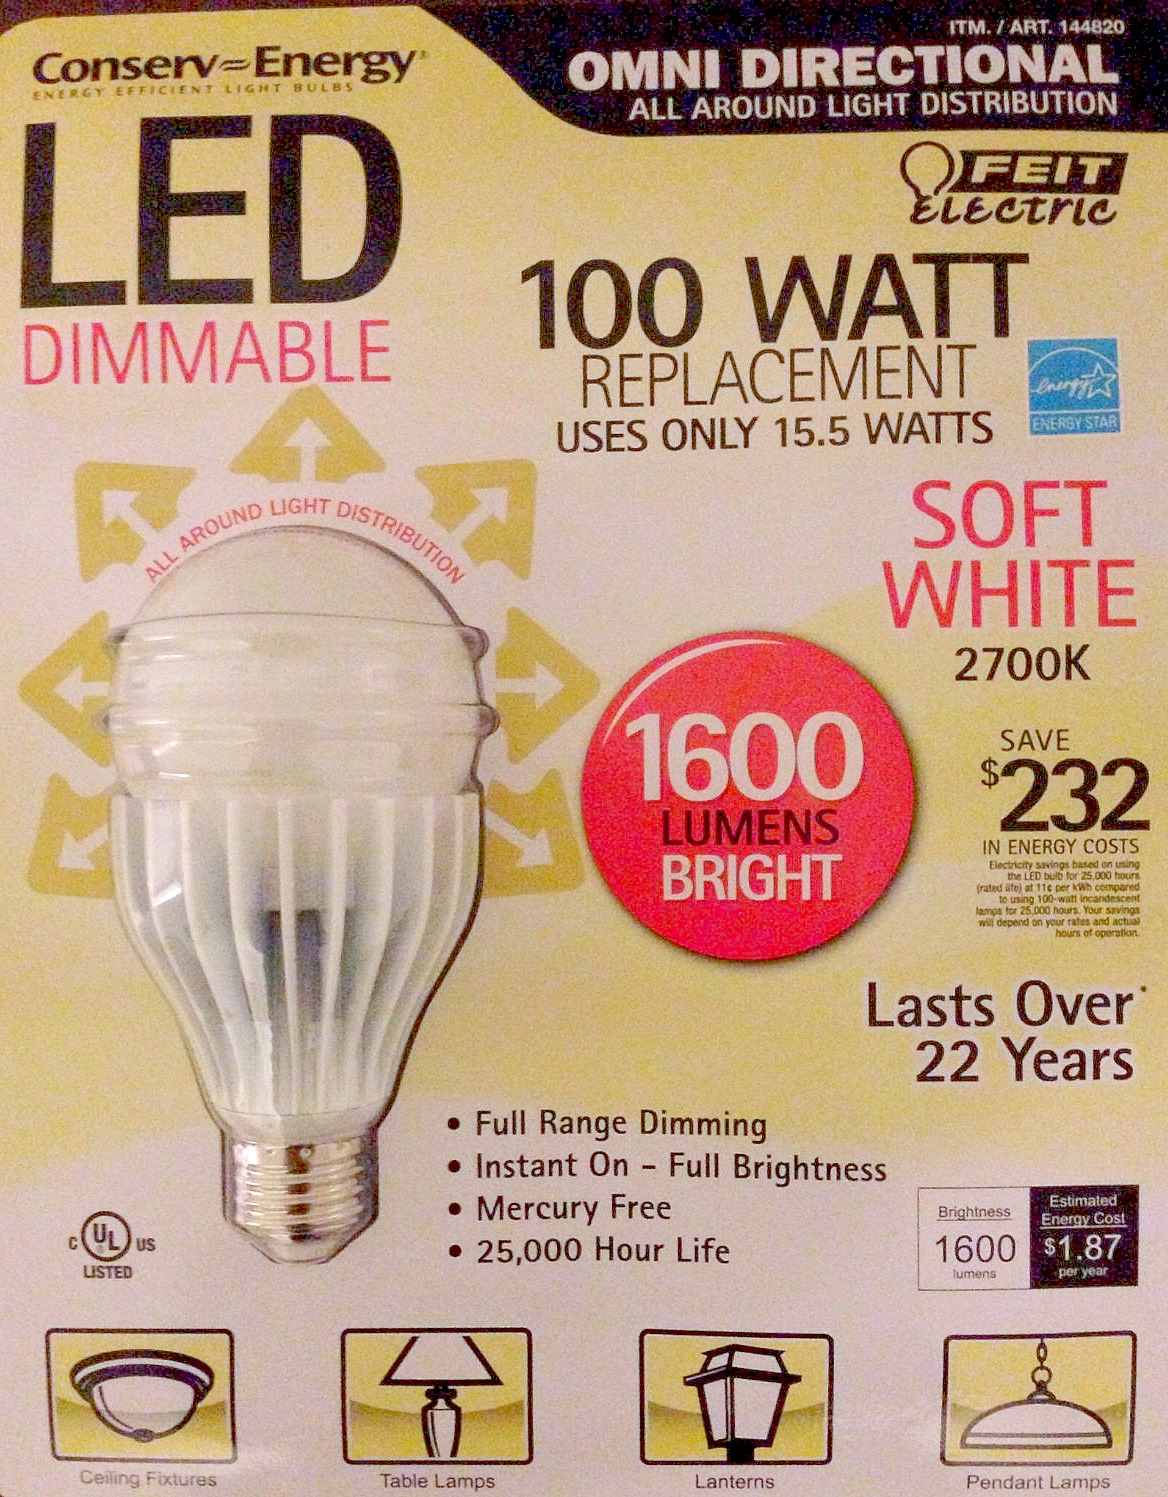 Feit Electric Omni Directional 100W/15.5W LED Dimmable 1600 Lumens